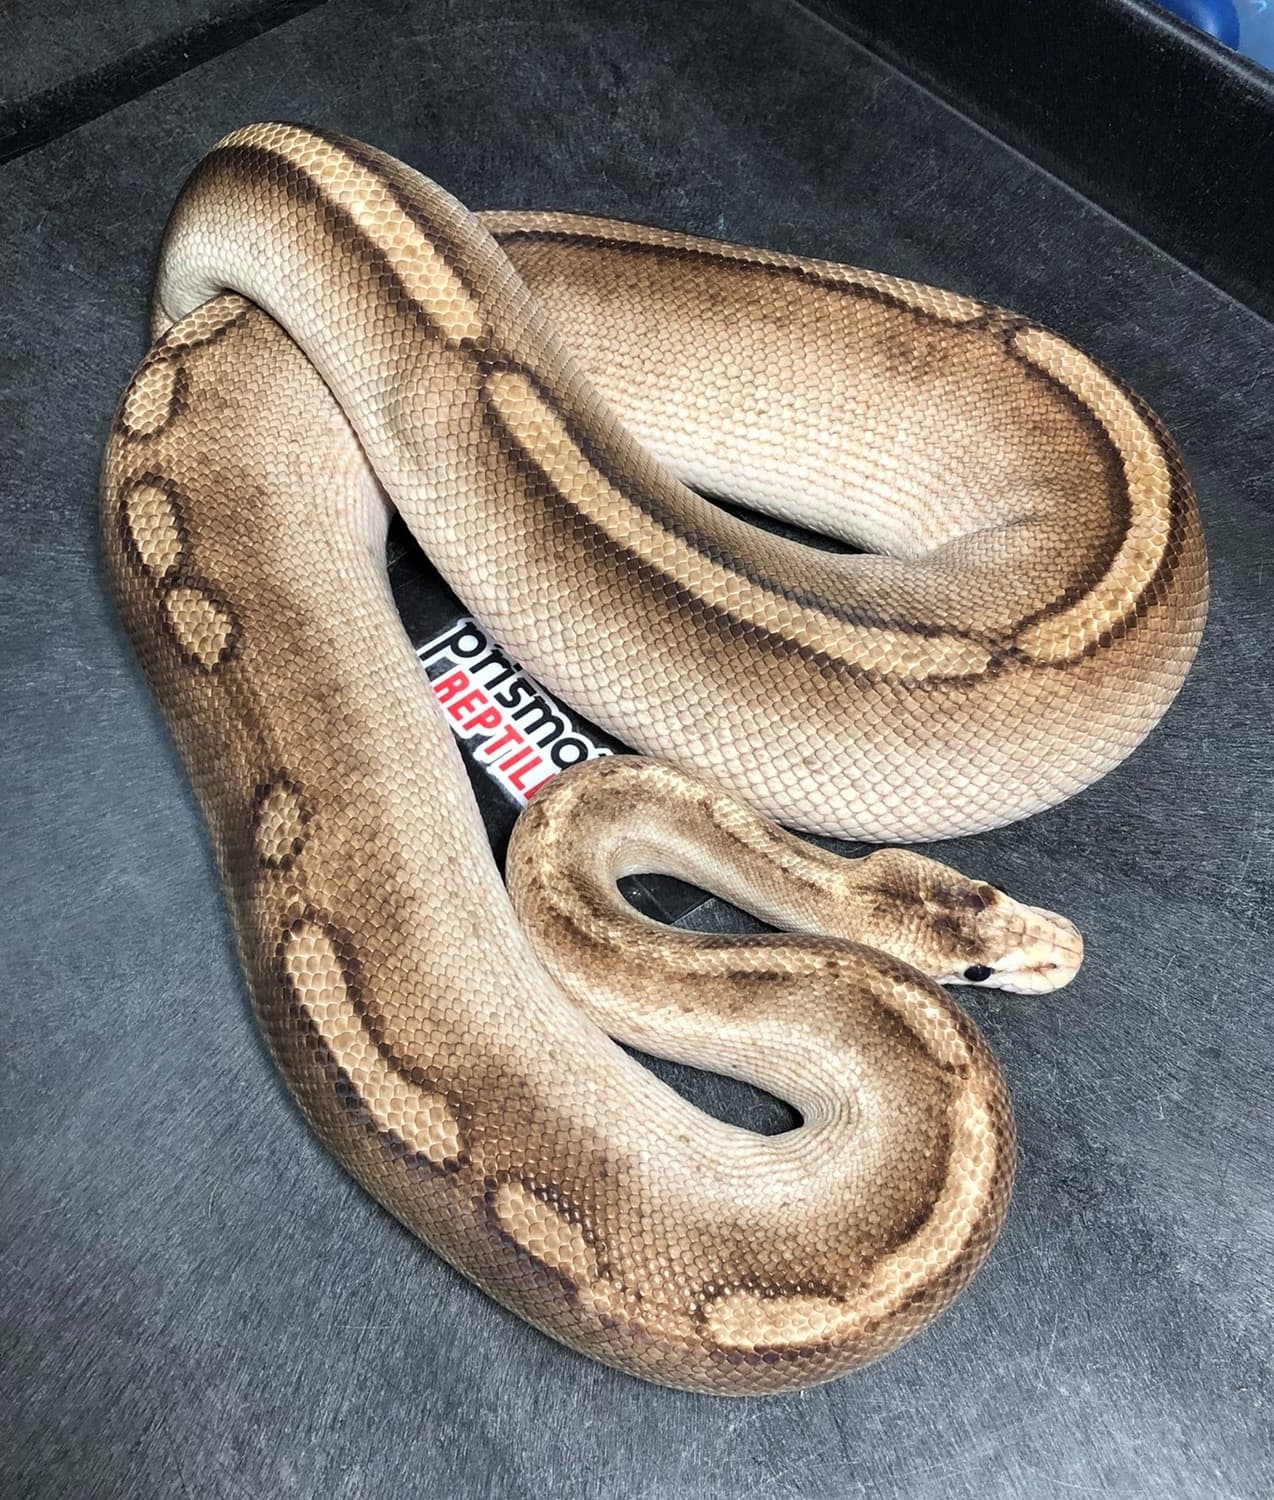 Champagne Ball Python by Prismatic Reptiles